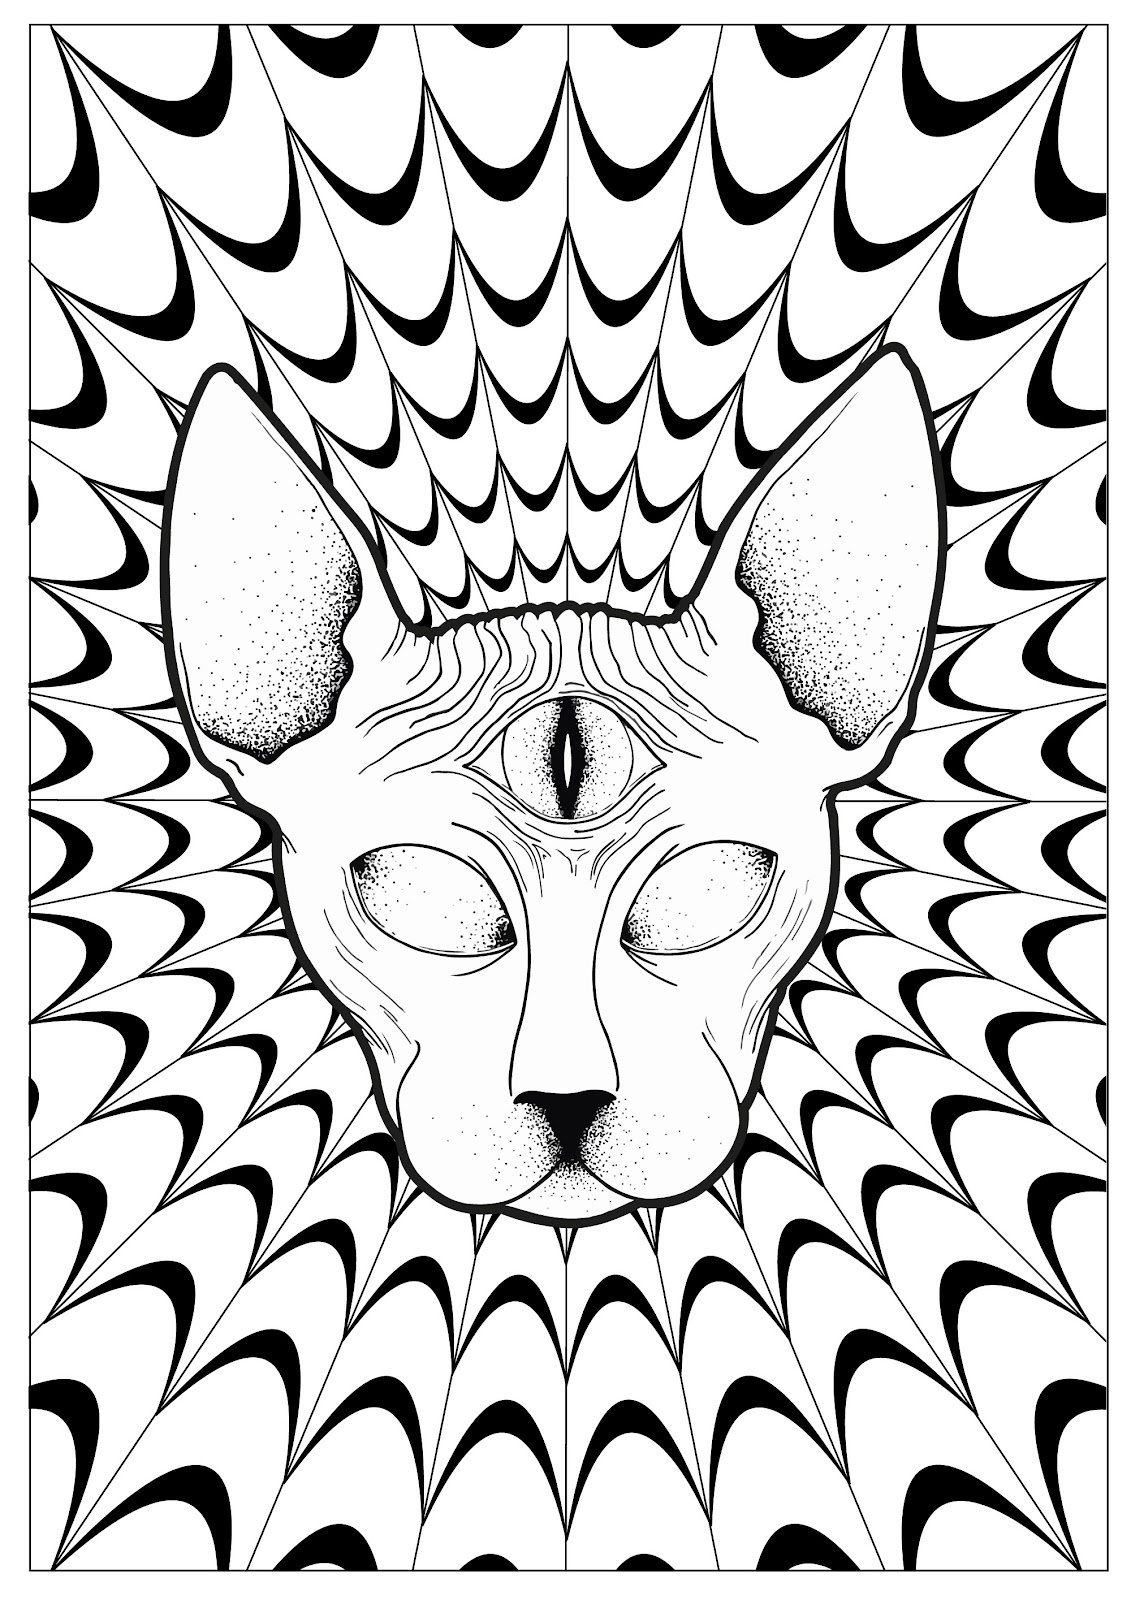 New Trippy Coloring Pages To Print for Kids